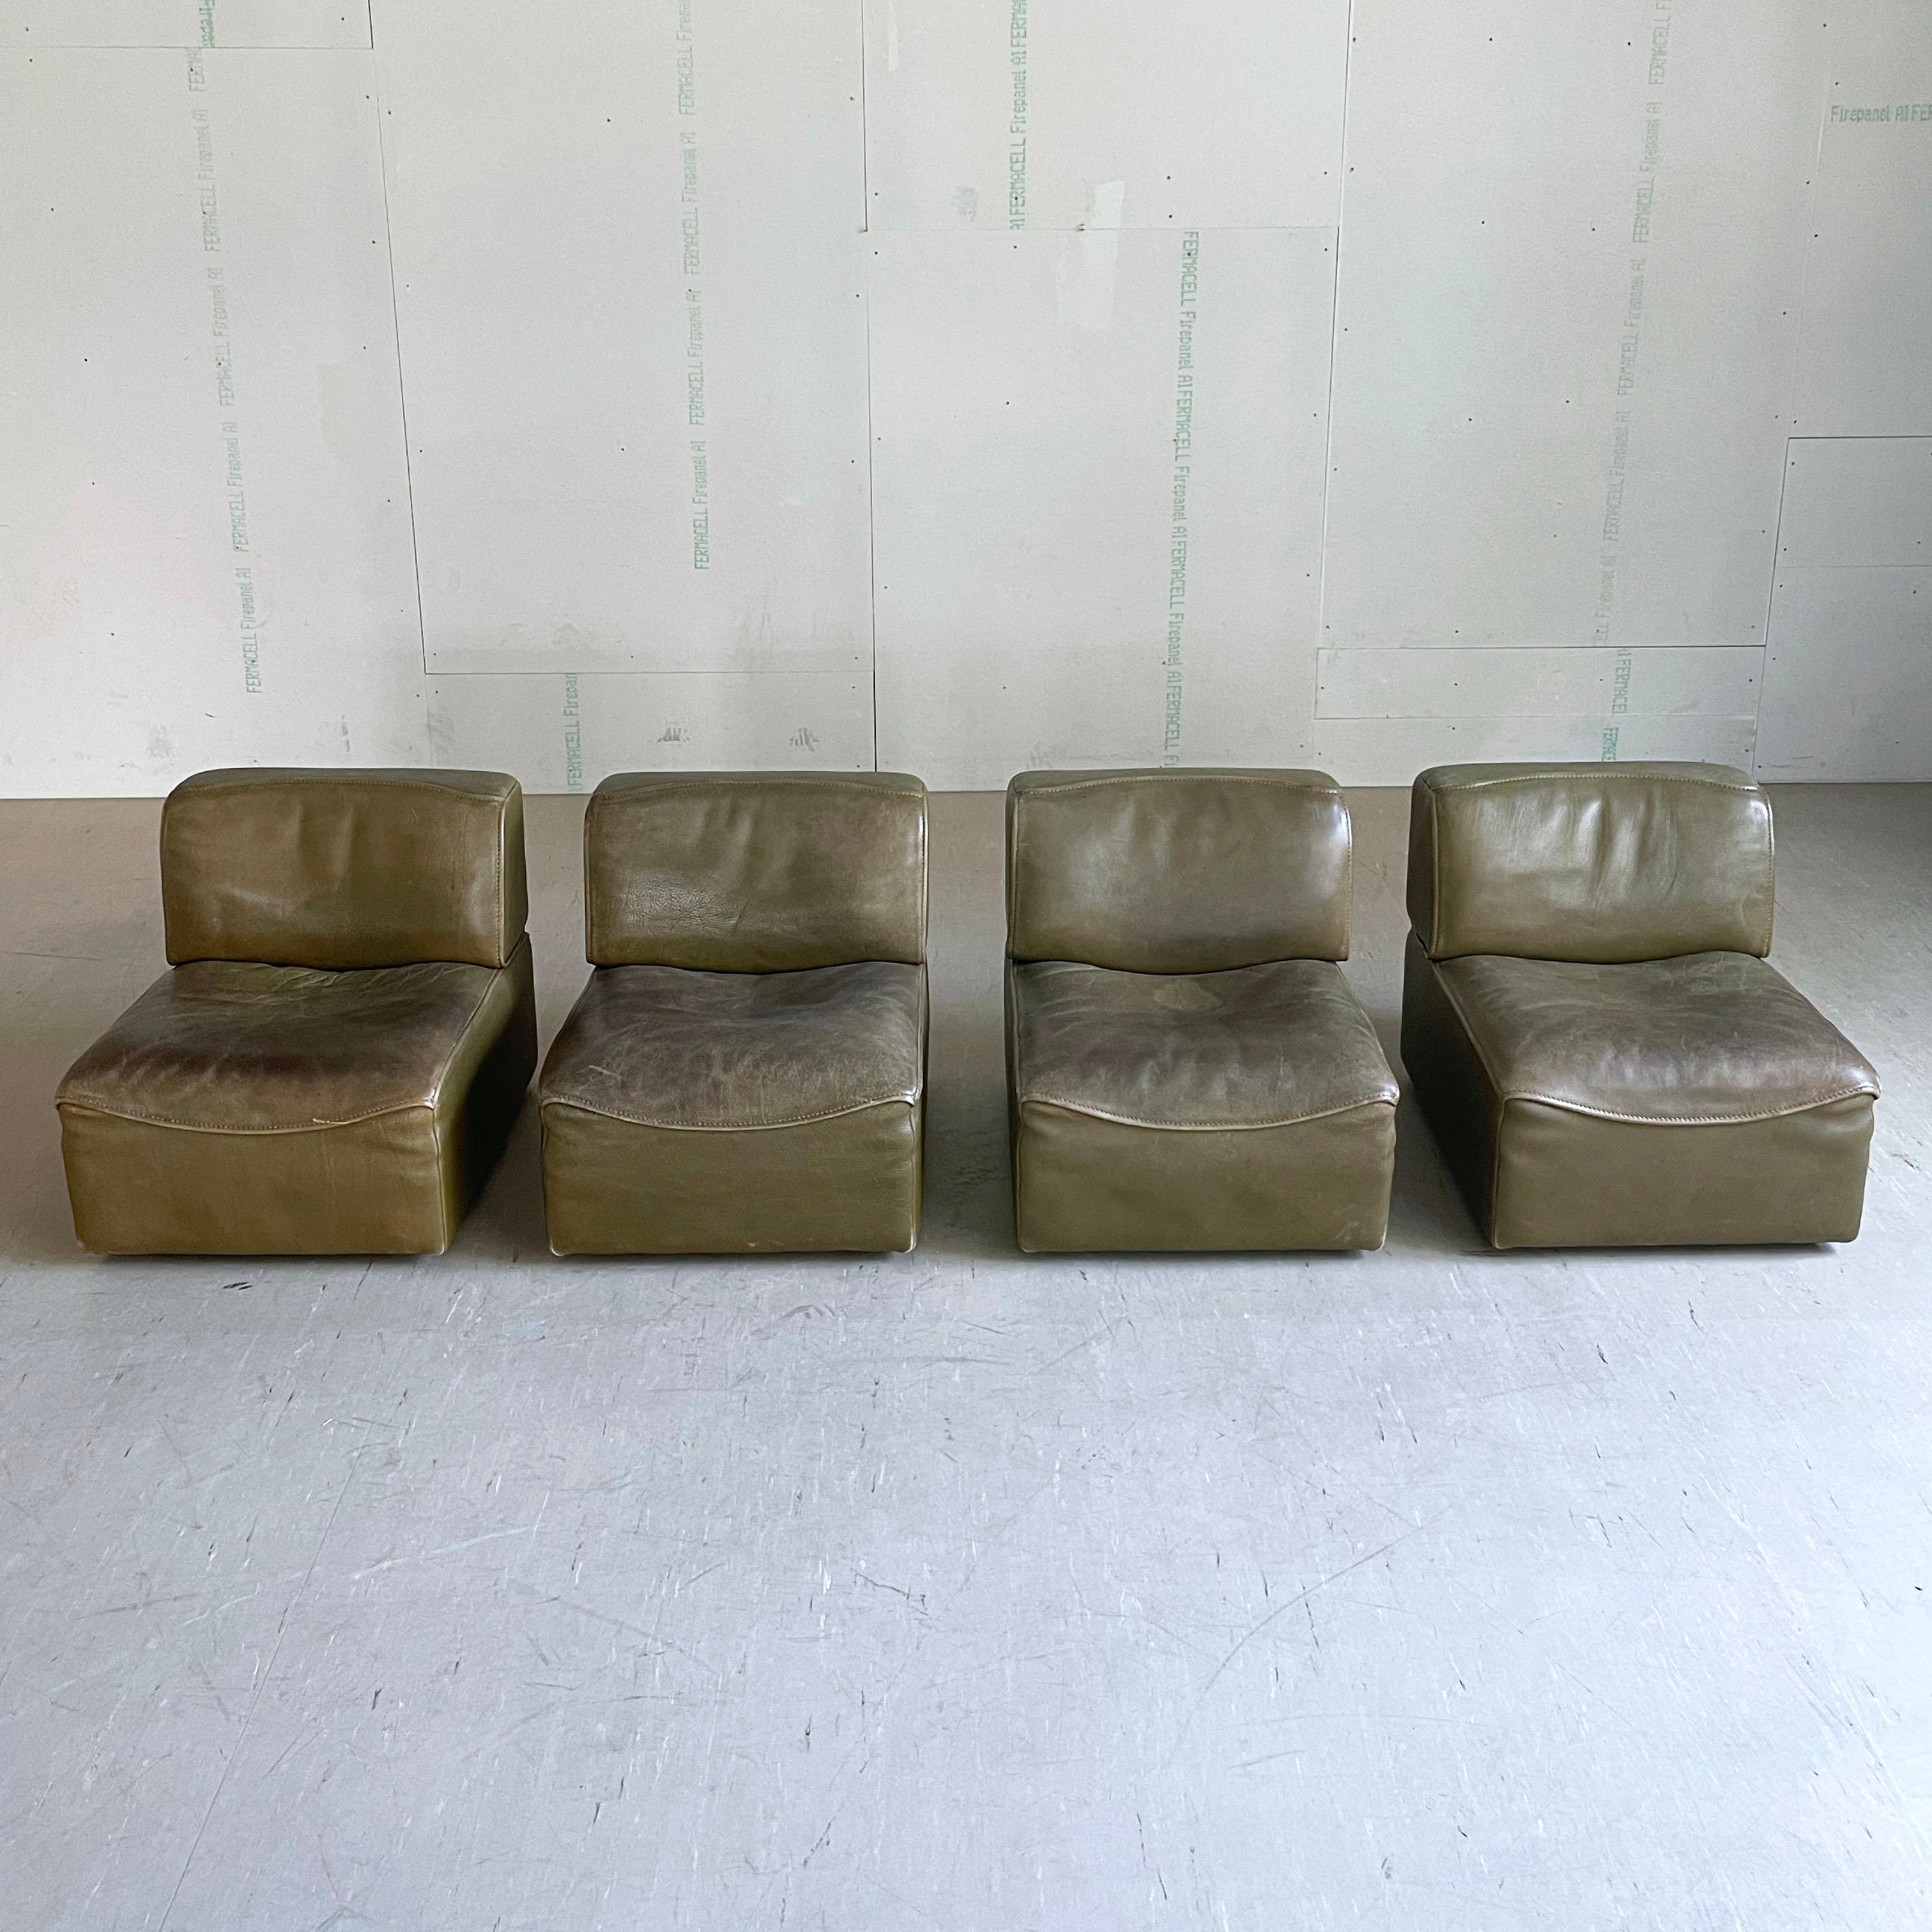 1960's Swiss DeSede DS-15 Modular Leather Sofa In Good Condition For Sale In Bern, CH